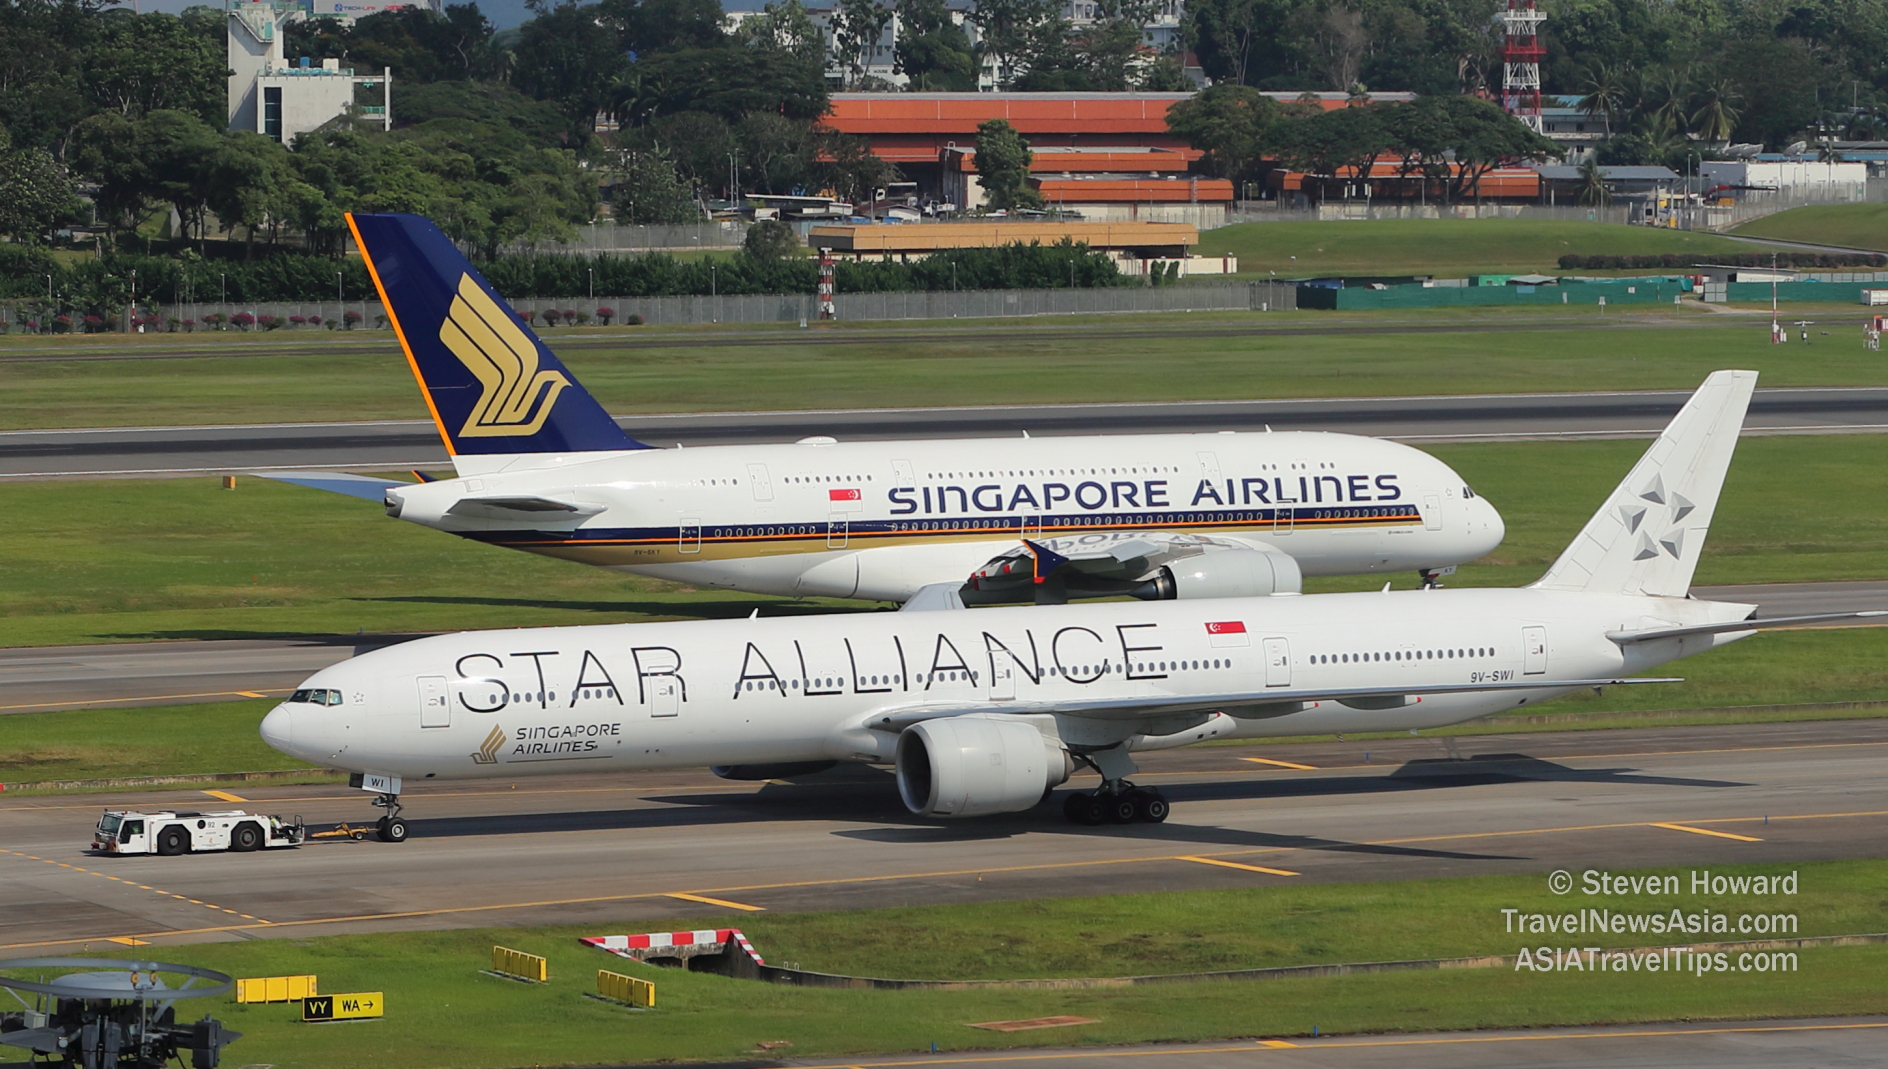 Singapore Airlines B777 and A380 aircraft at Changi Airport. Picture by Steven Howard of TravelNewsAsia.com Click to enlarge.